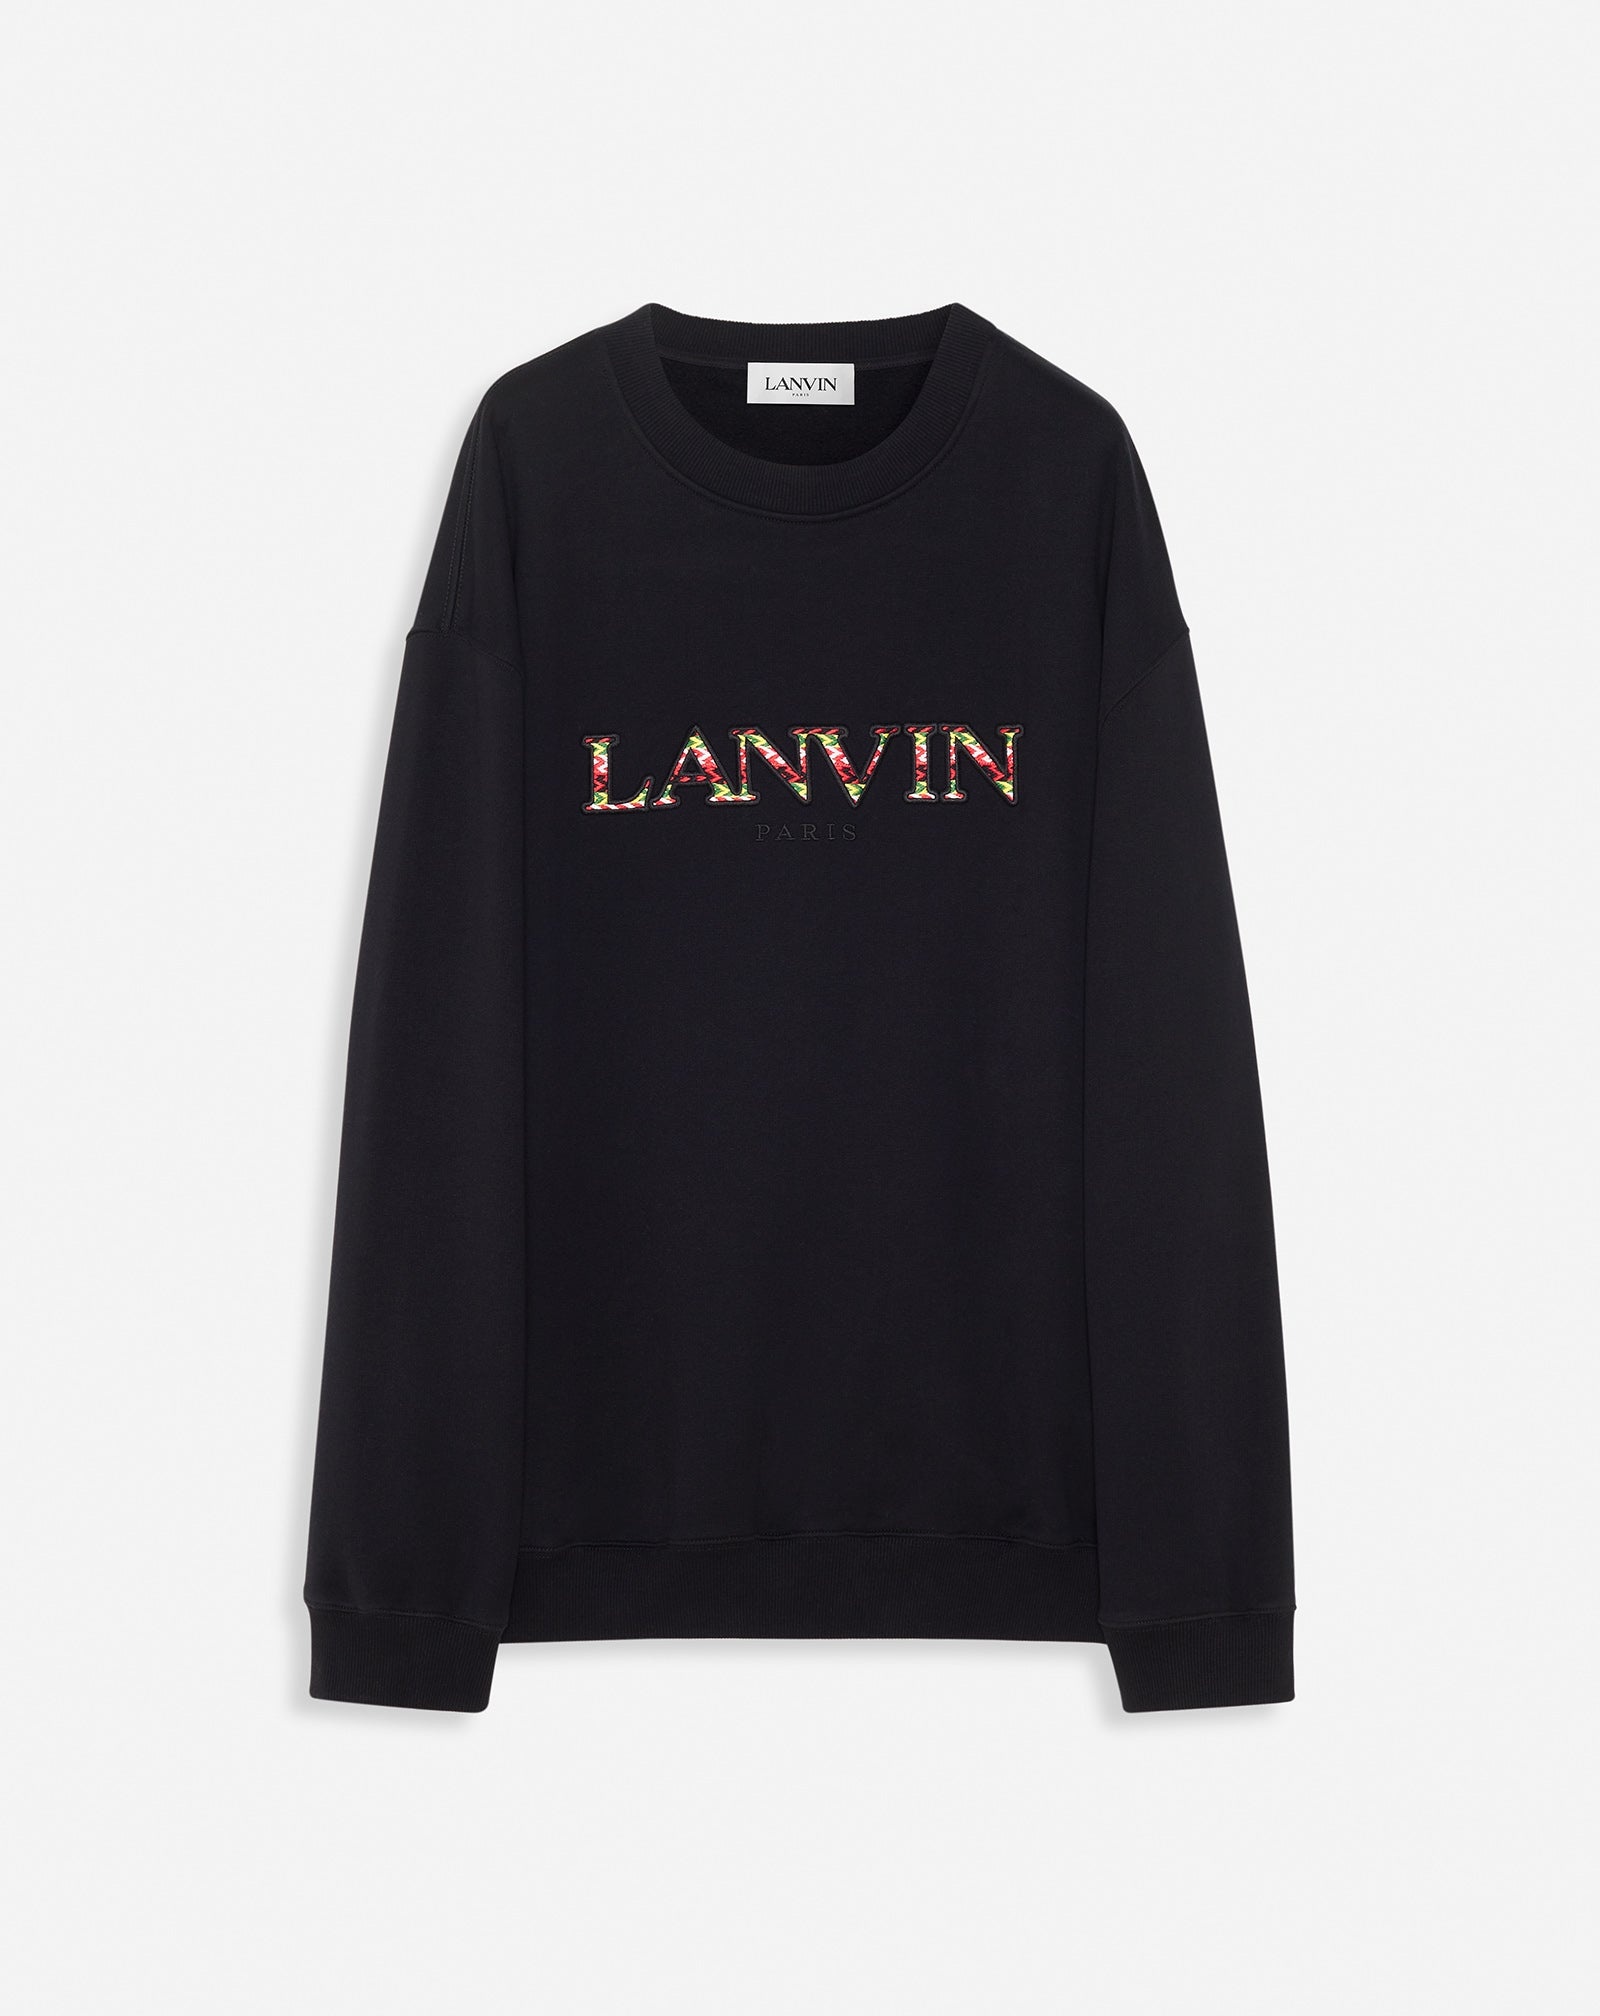 OVERSIZED EMBROIDERED LANVIN CURB SWEATSHIRT - 1